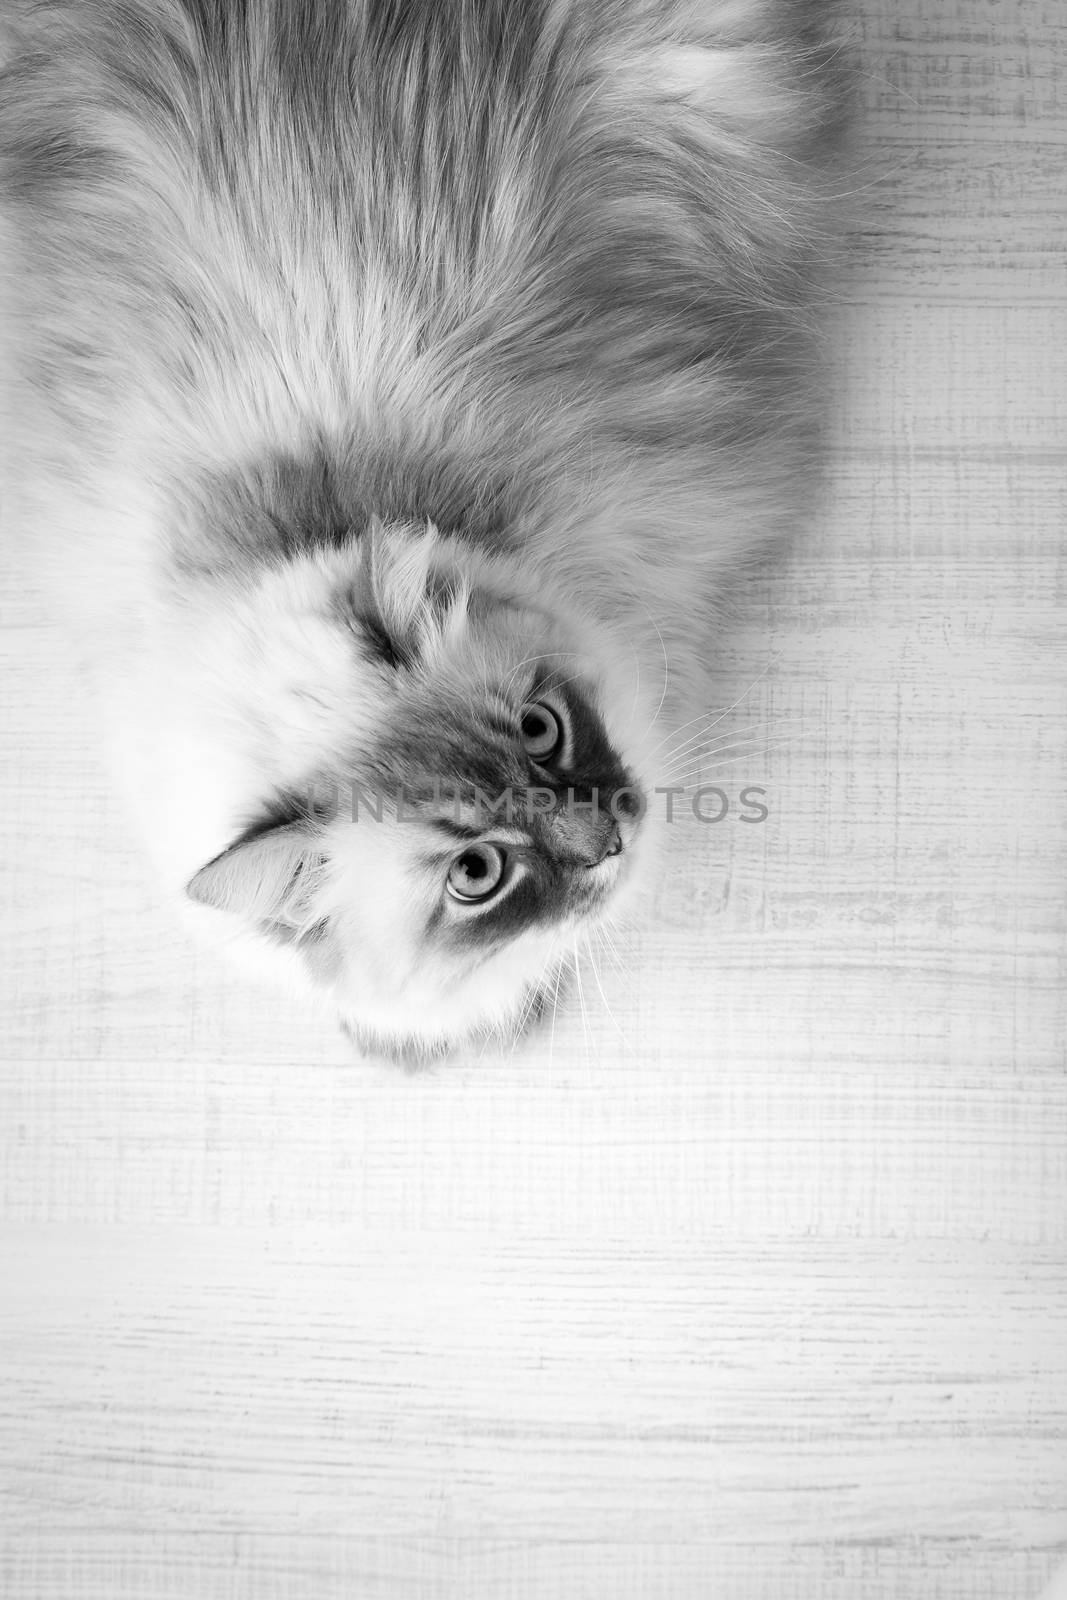 Domestic cat lying on a wooden table  by Deniskarpenkov